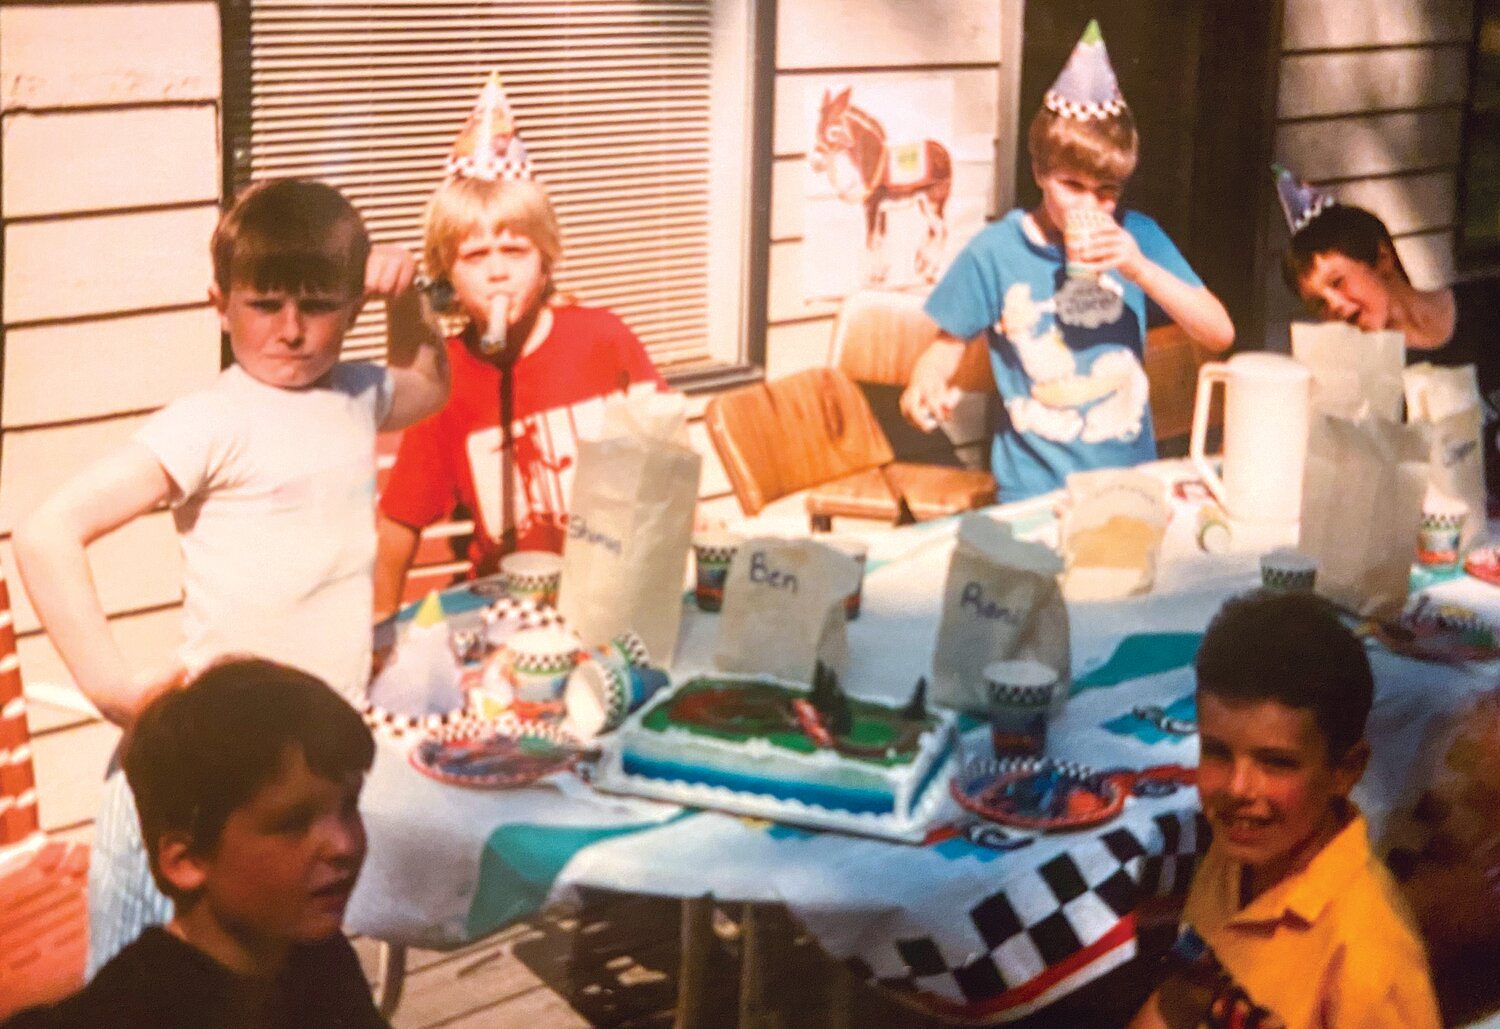 Seamus Sims (far left, in white T-shirt) with Ben Early at his seventh birthday party.